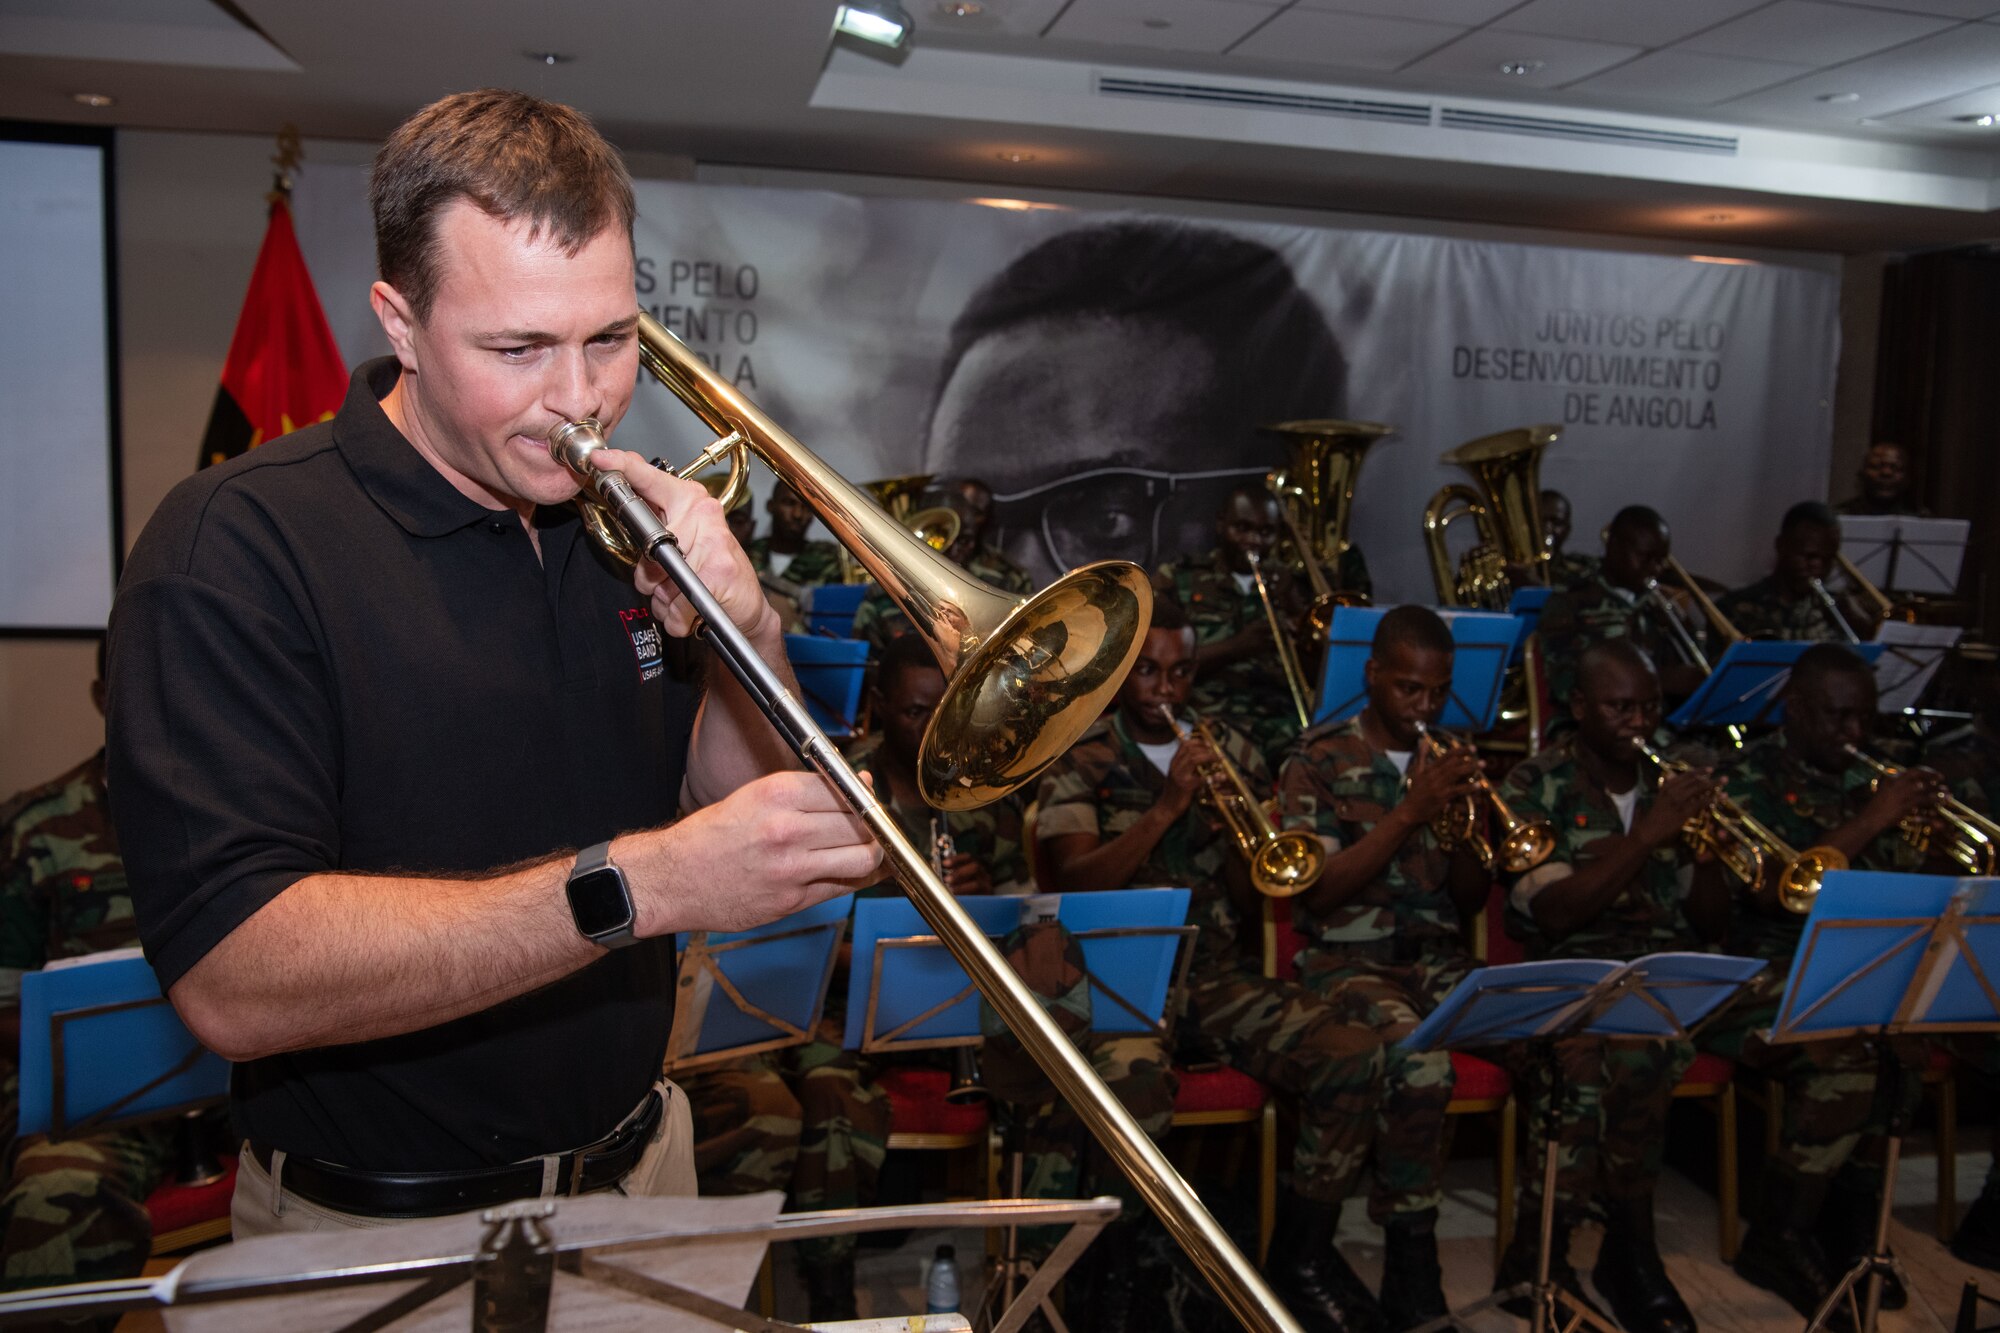 Staff Sgt. Brian Logan, assigned to the U.S. Air Forces in Europe and Air Forces Africa (USAFE-AFAFRICA) Band’s Five Star Brass, plays the trombone during a rehearsal at the Dr. Antonio Agostinho Neto Memorial in Luanda, Angola